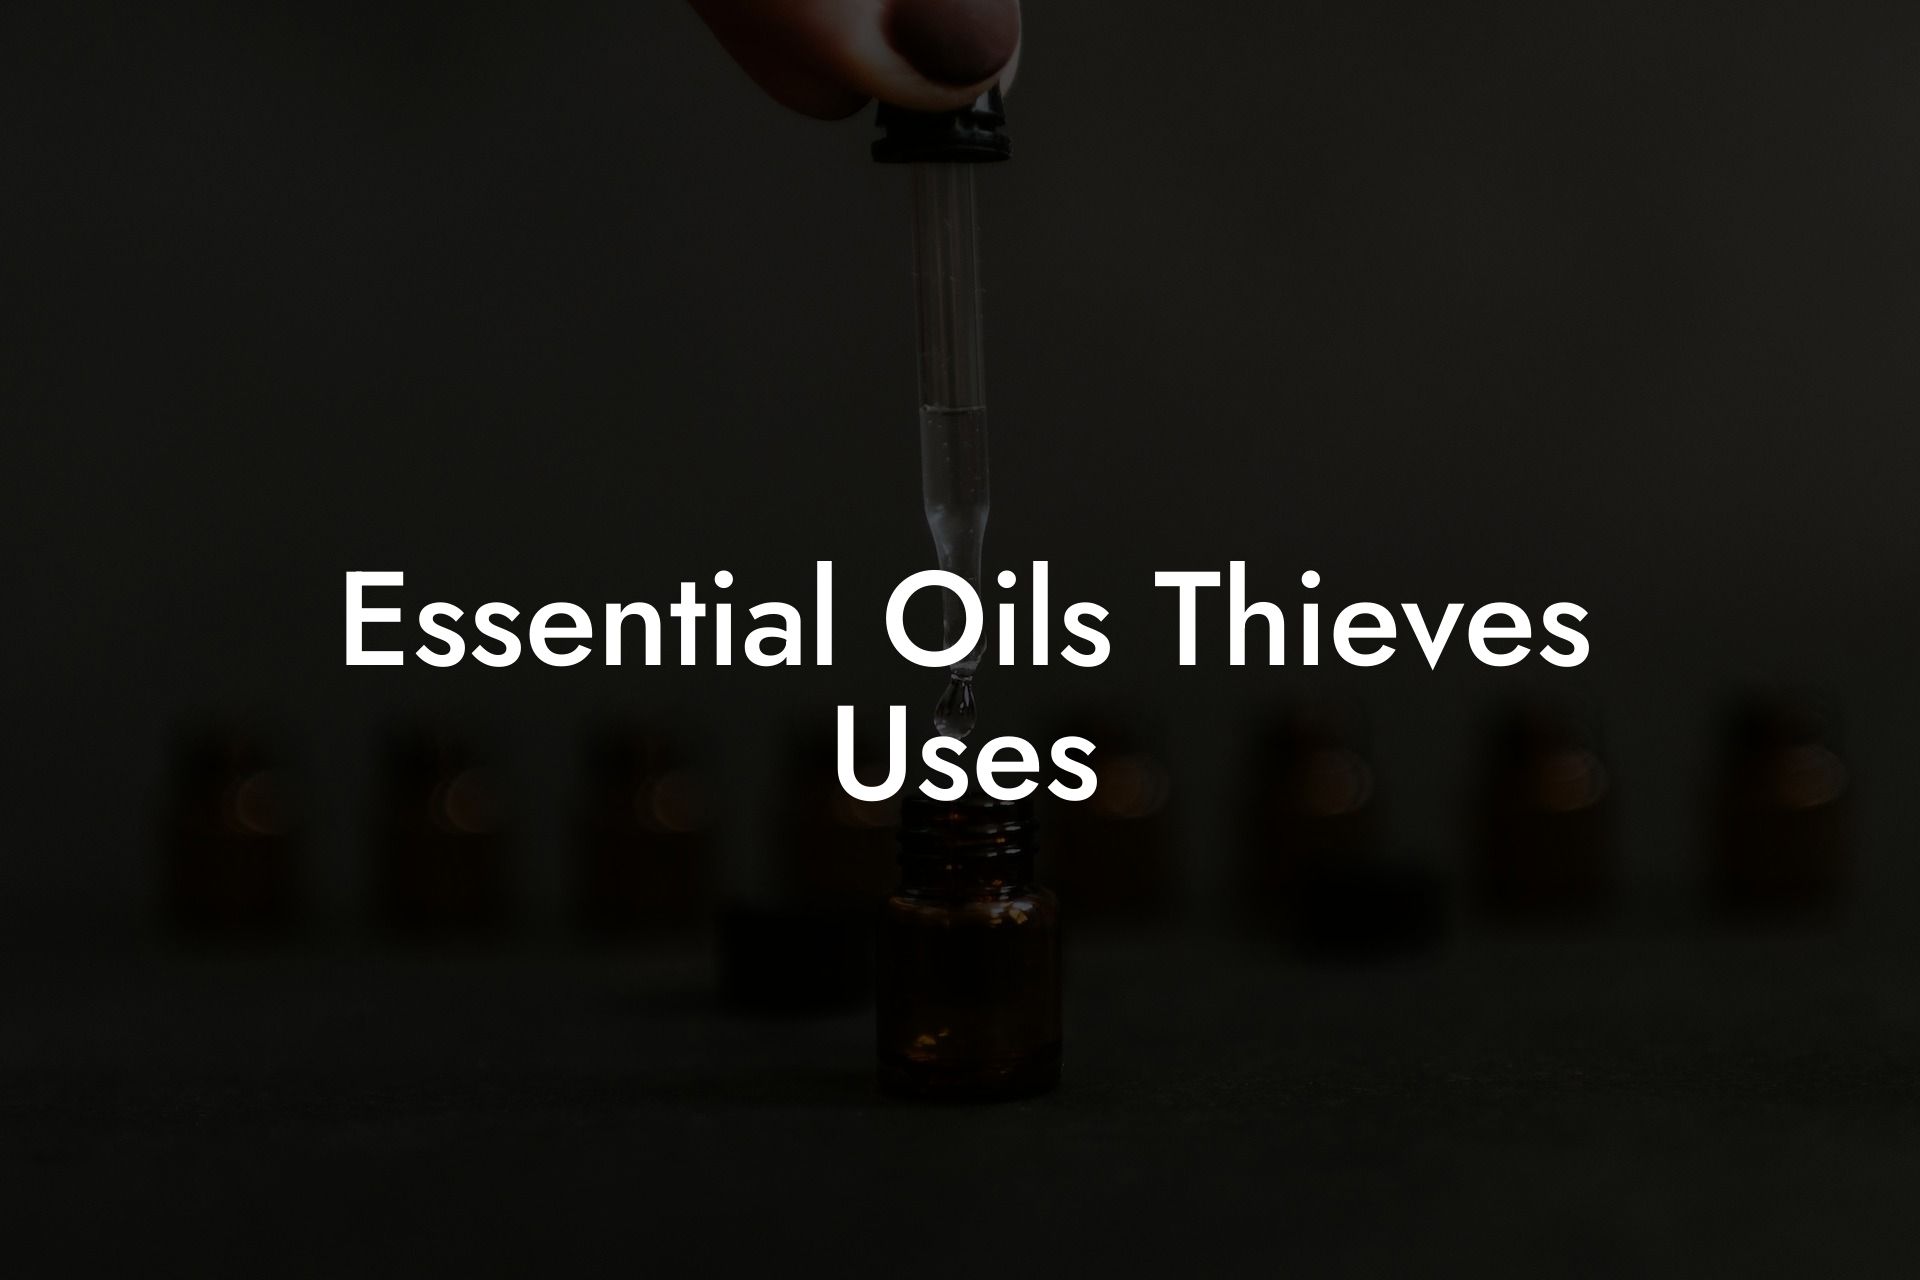 Essential Oils Thieves Uses